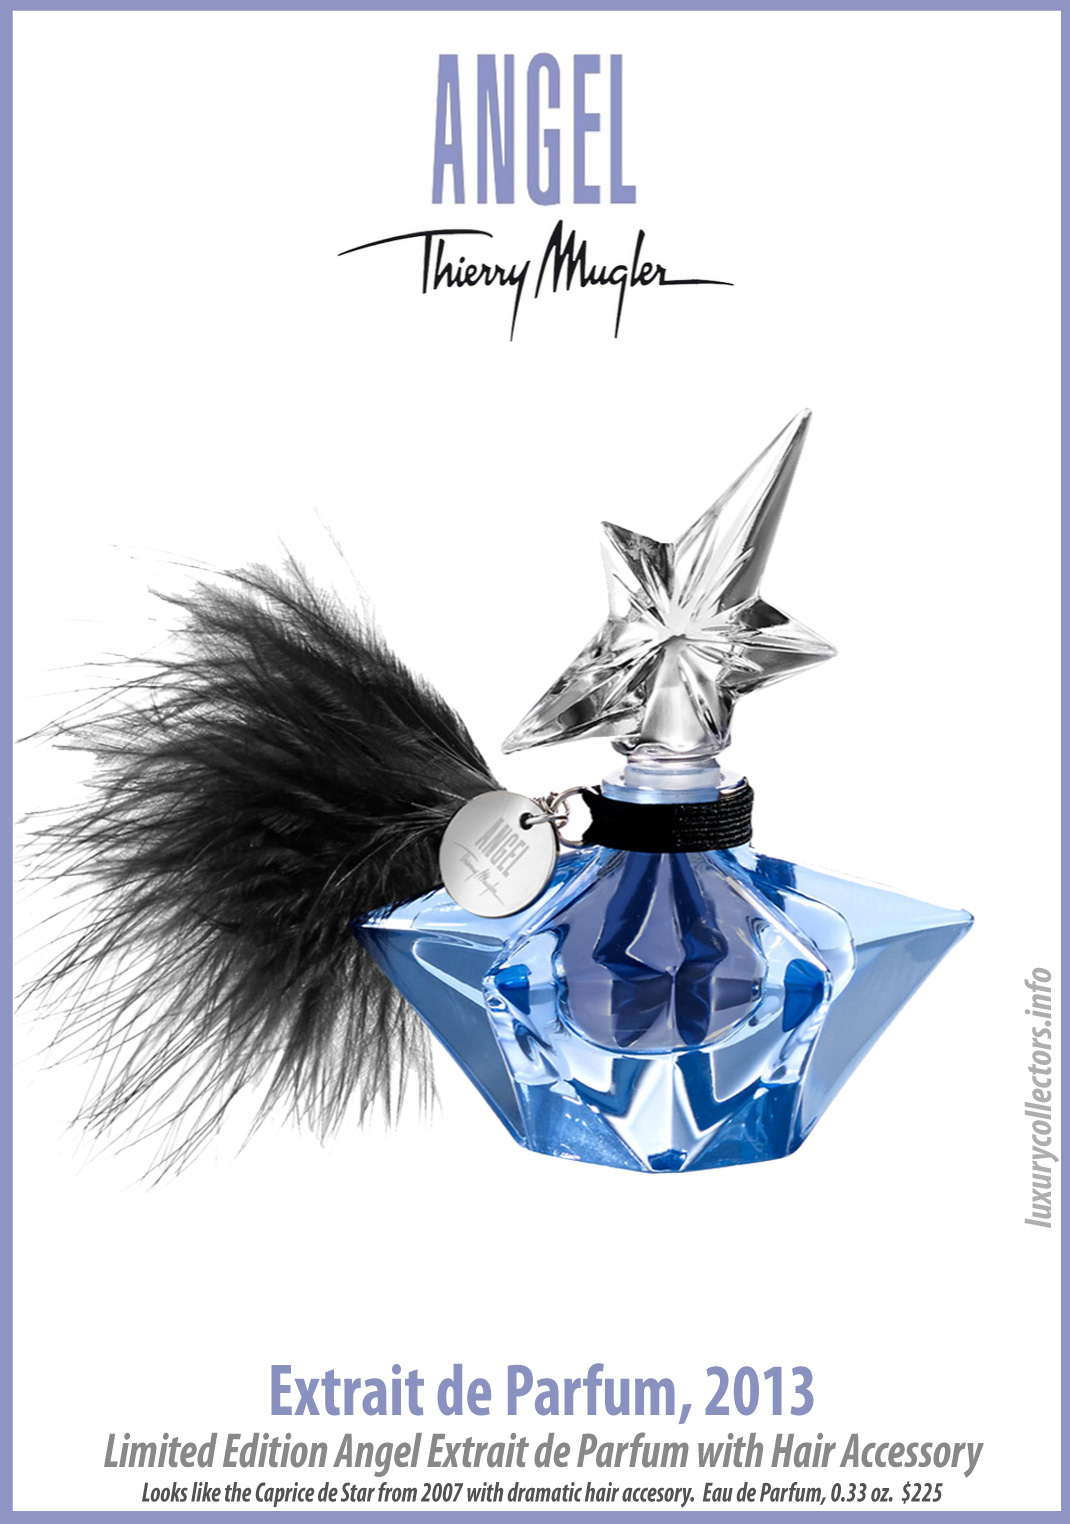 Thierry Mugler Angel Perfume Collector's Limited Edition Bottle 2013 Extrait de Parfum Hair Accesory